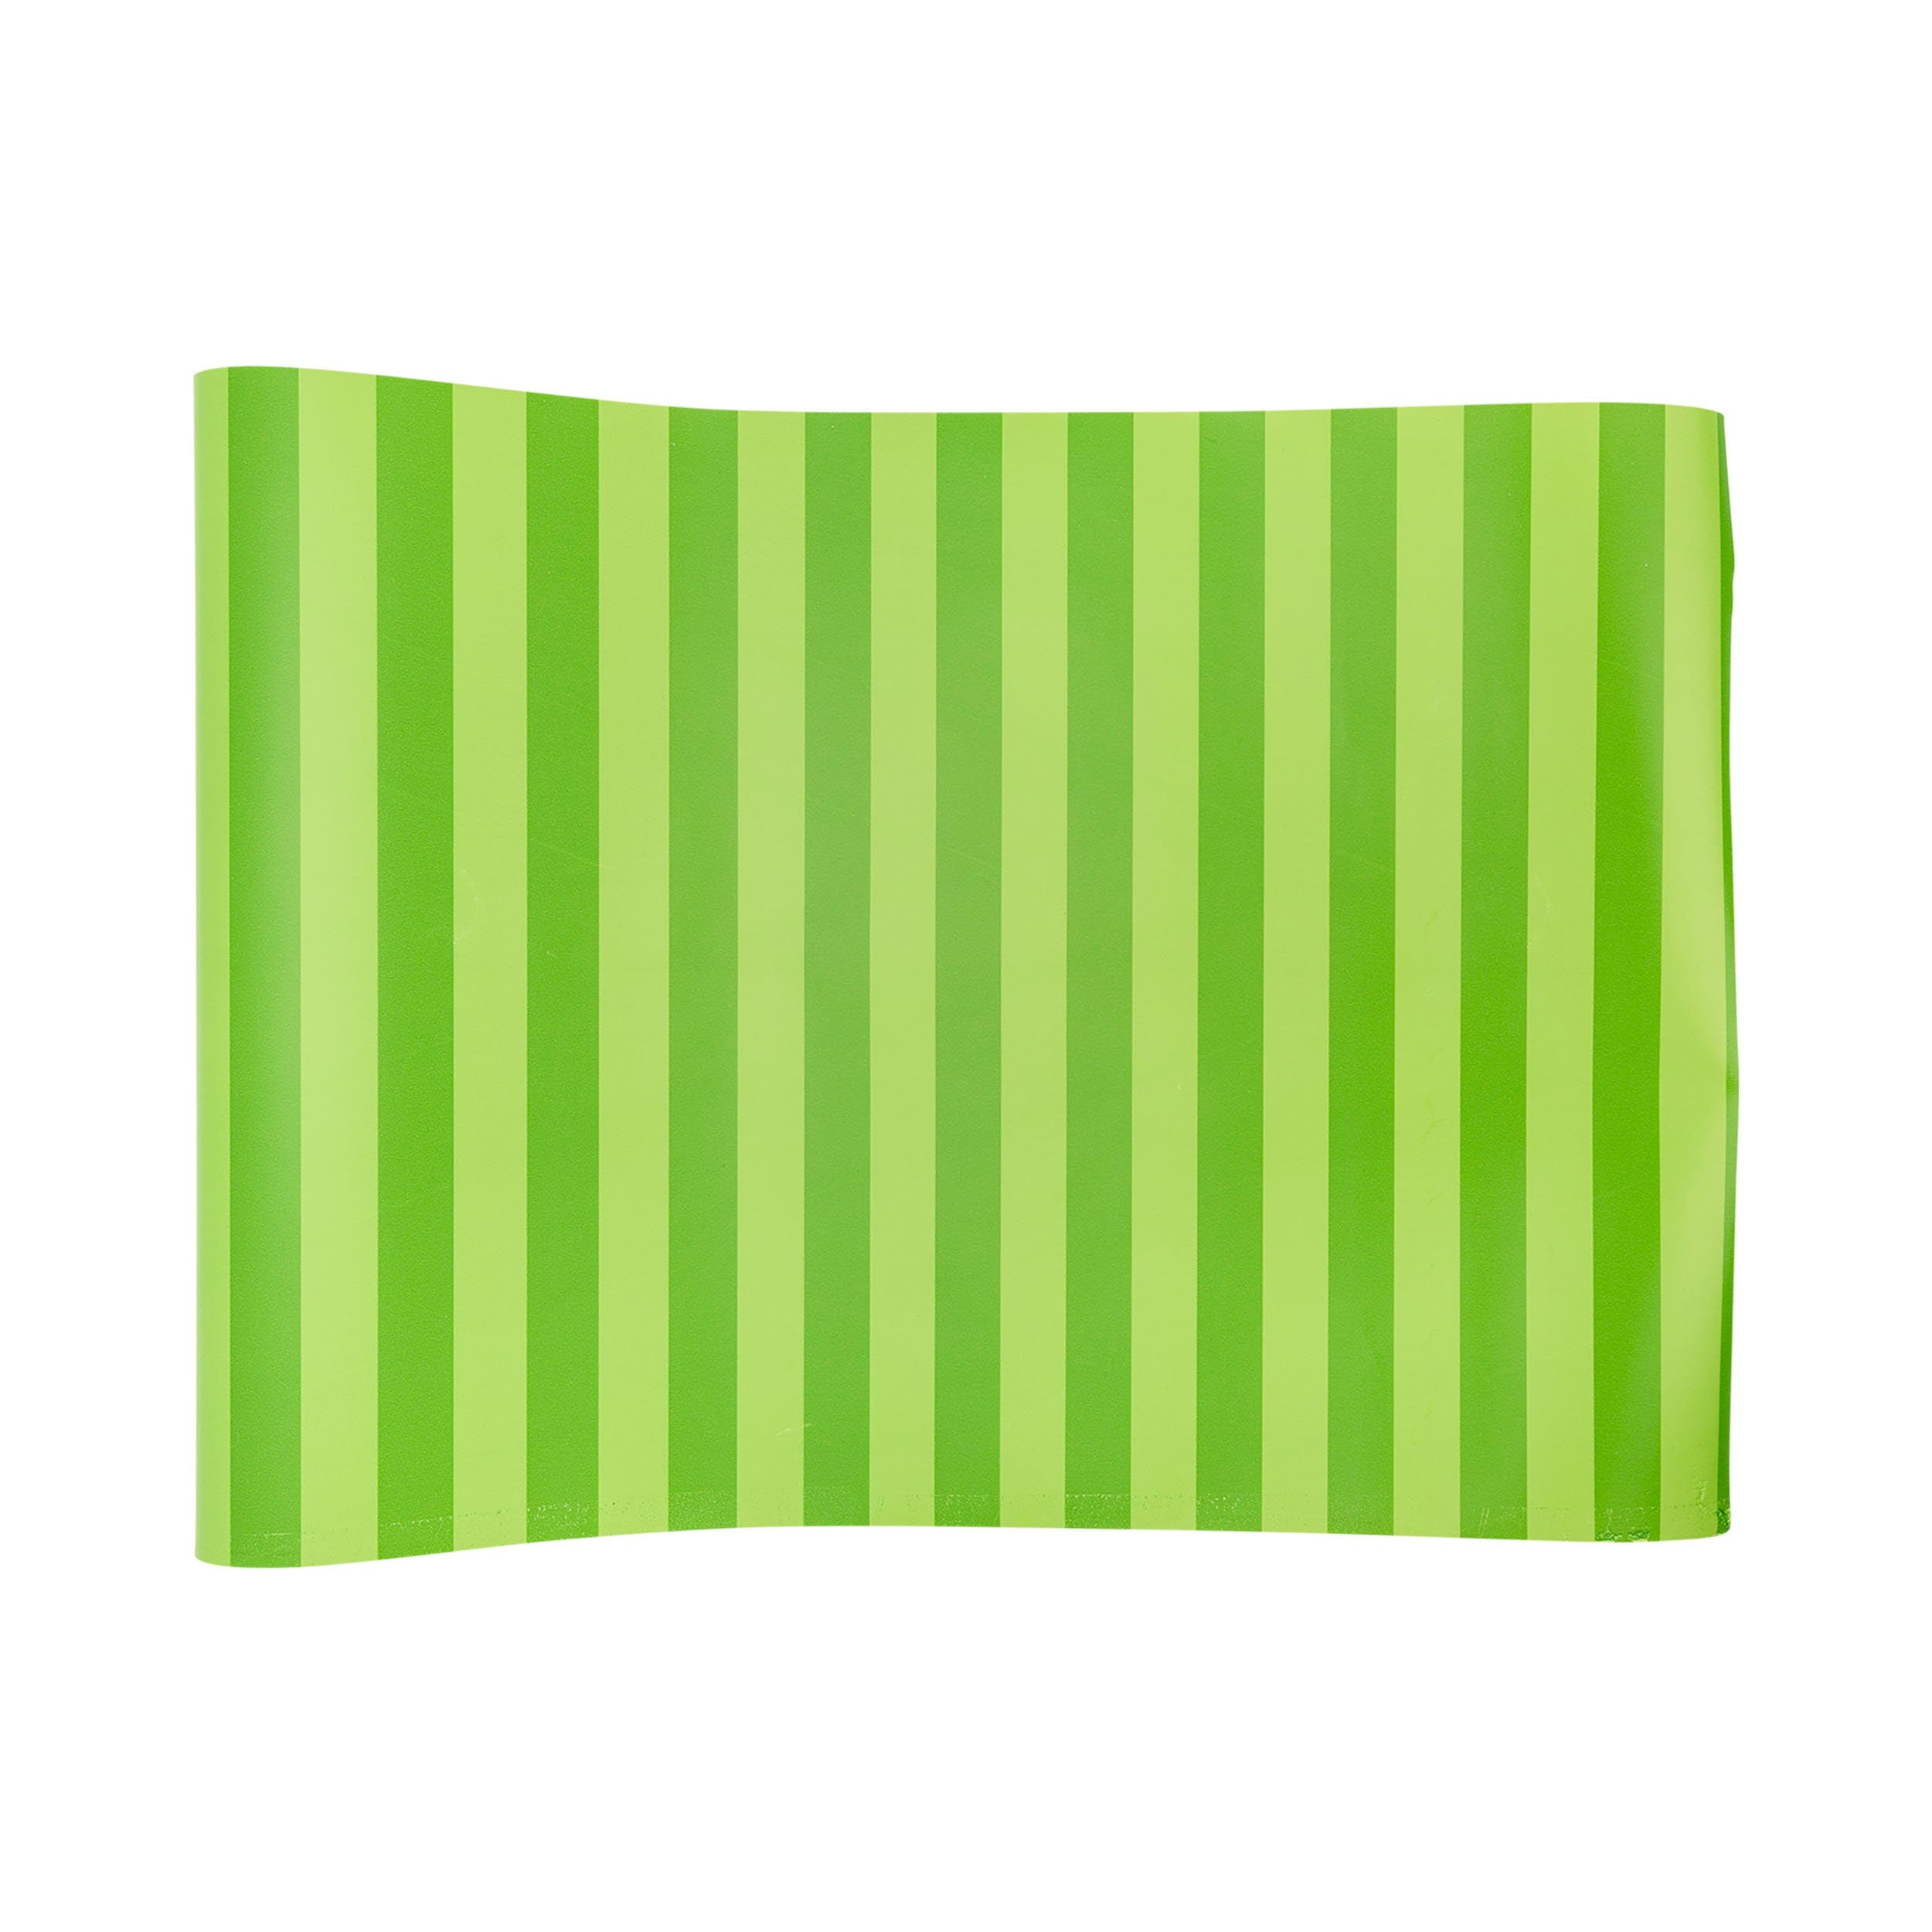 Green Sports field with stripes that mimic lines that have been mowed into the grass. Green Paper Table Runner